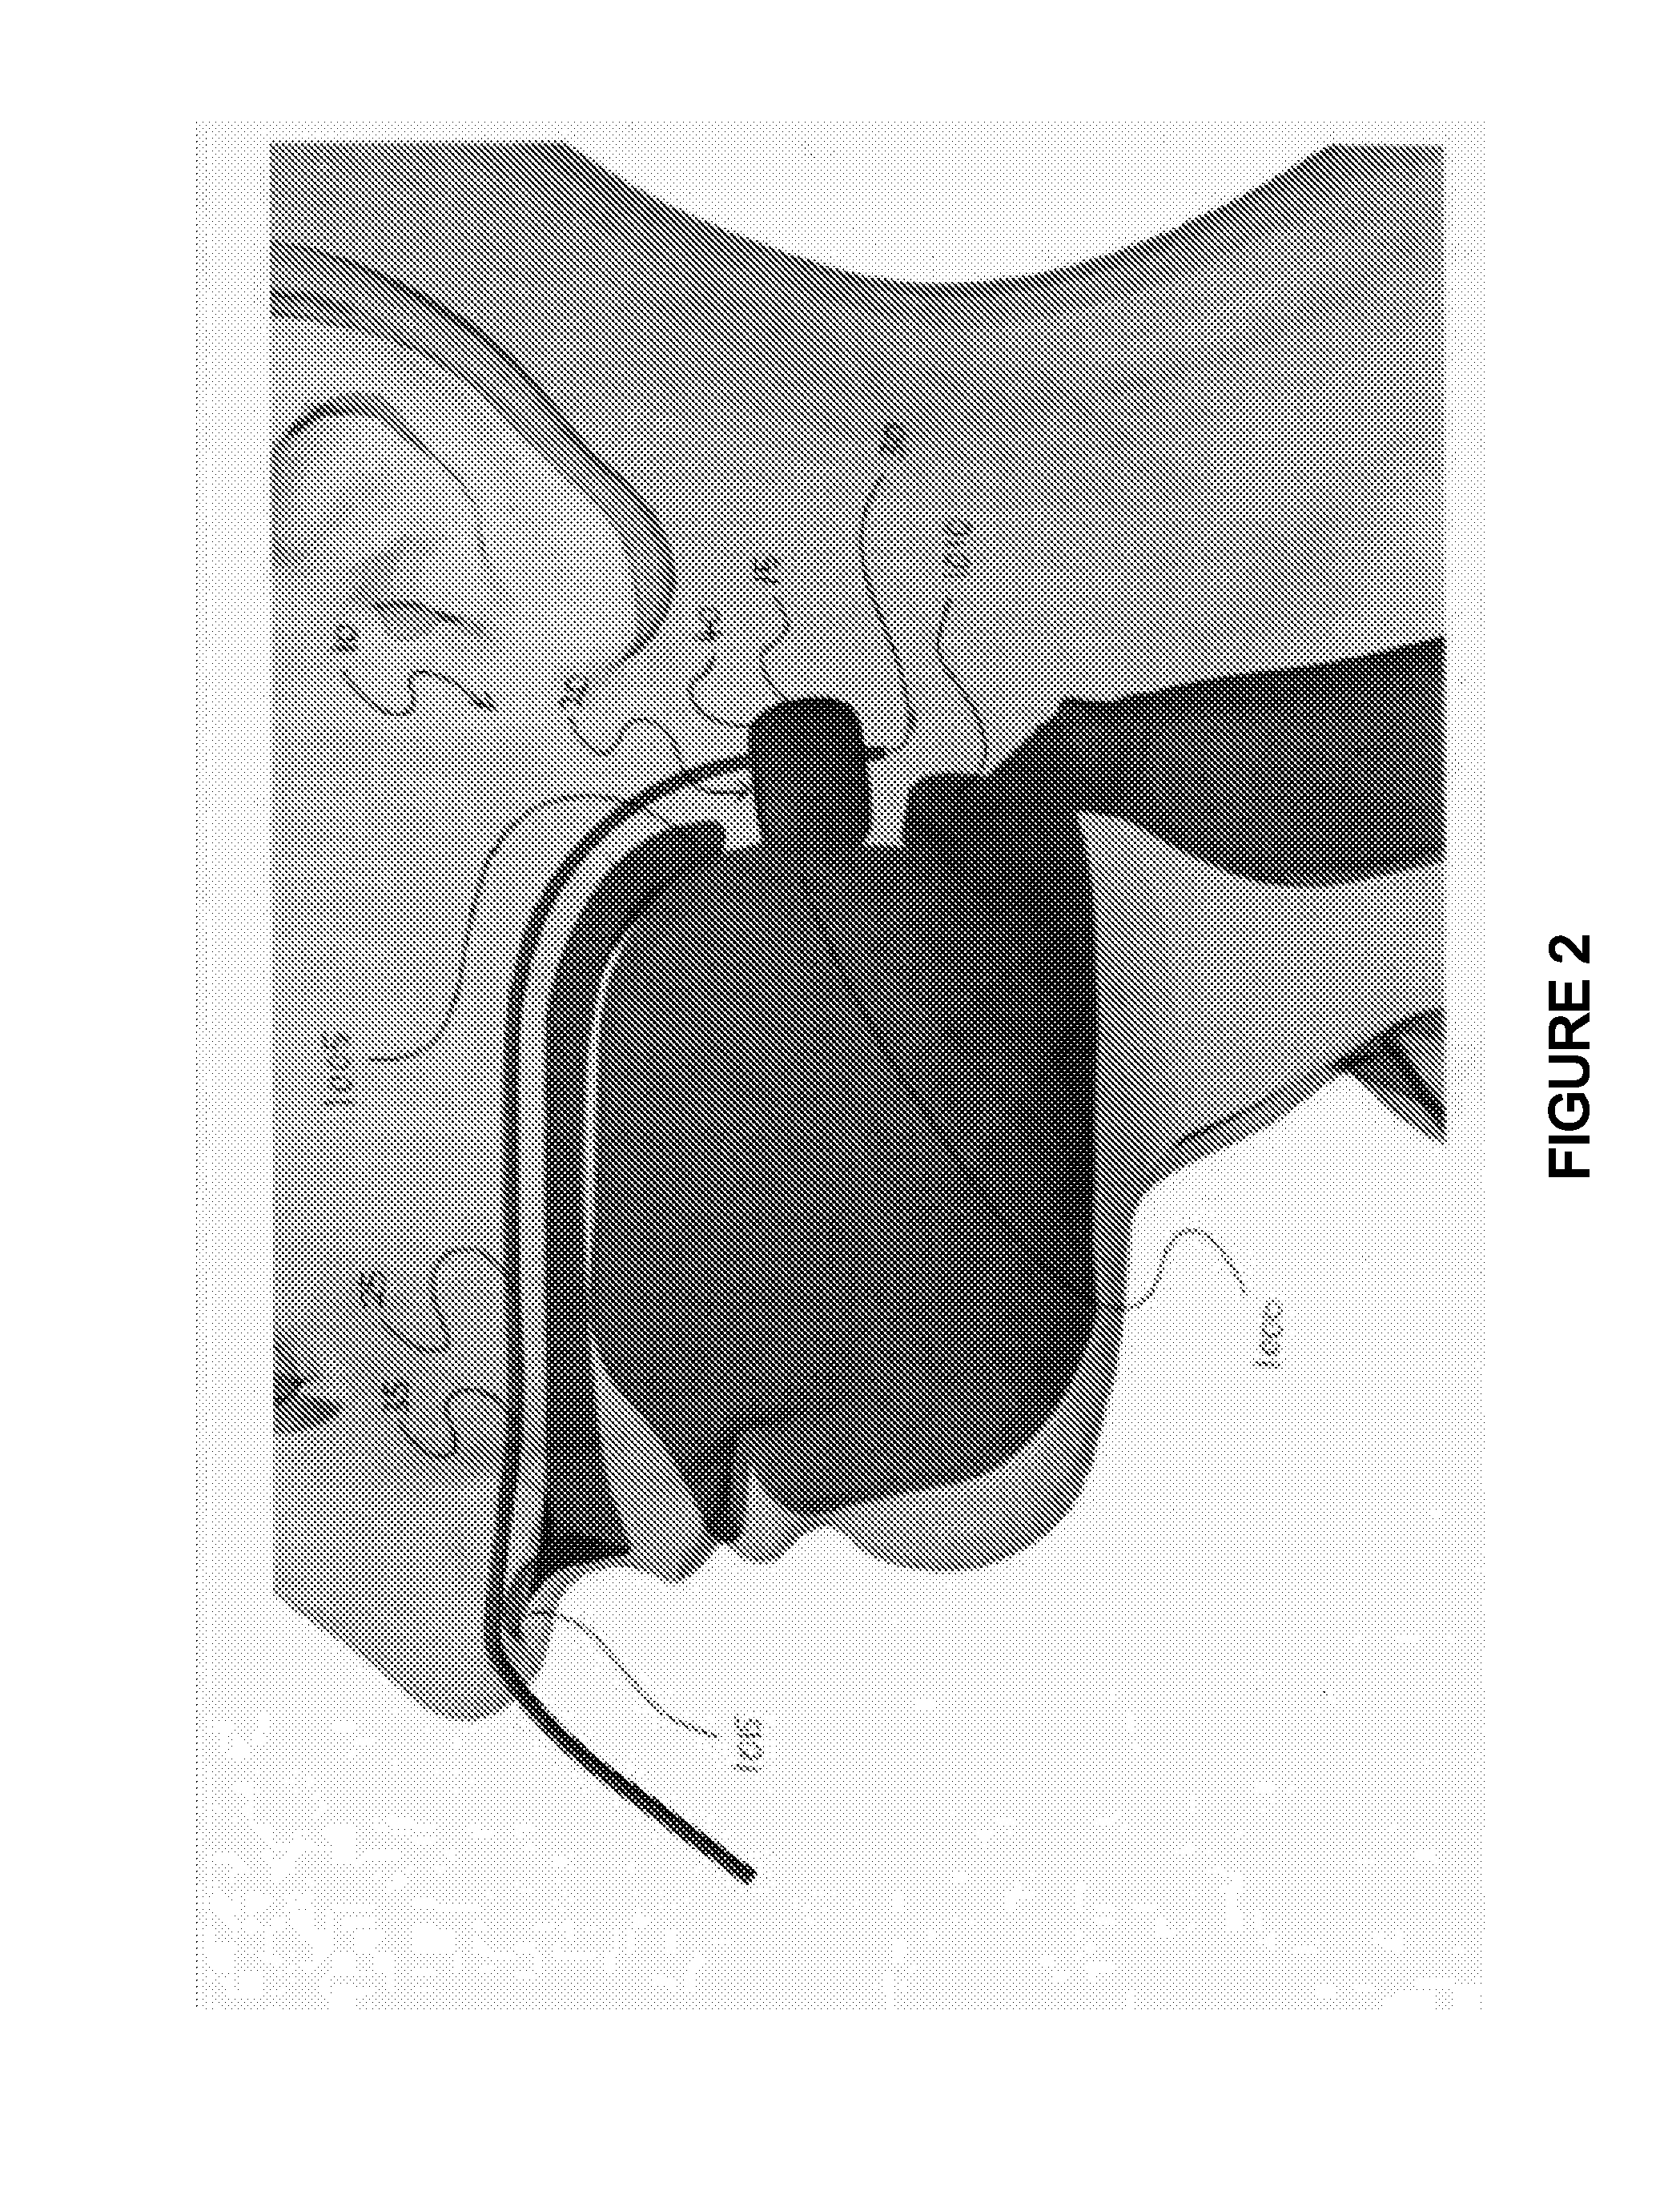 Devices for Maintaining An Oropharyngeal Airway, Methods of Creating An Oropharyngeal Airway and Systems for Mainitaining An Oropharyngeal Airway